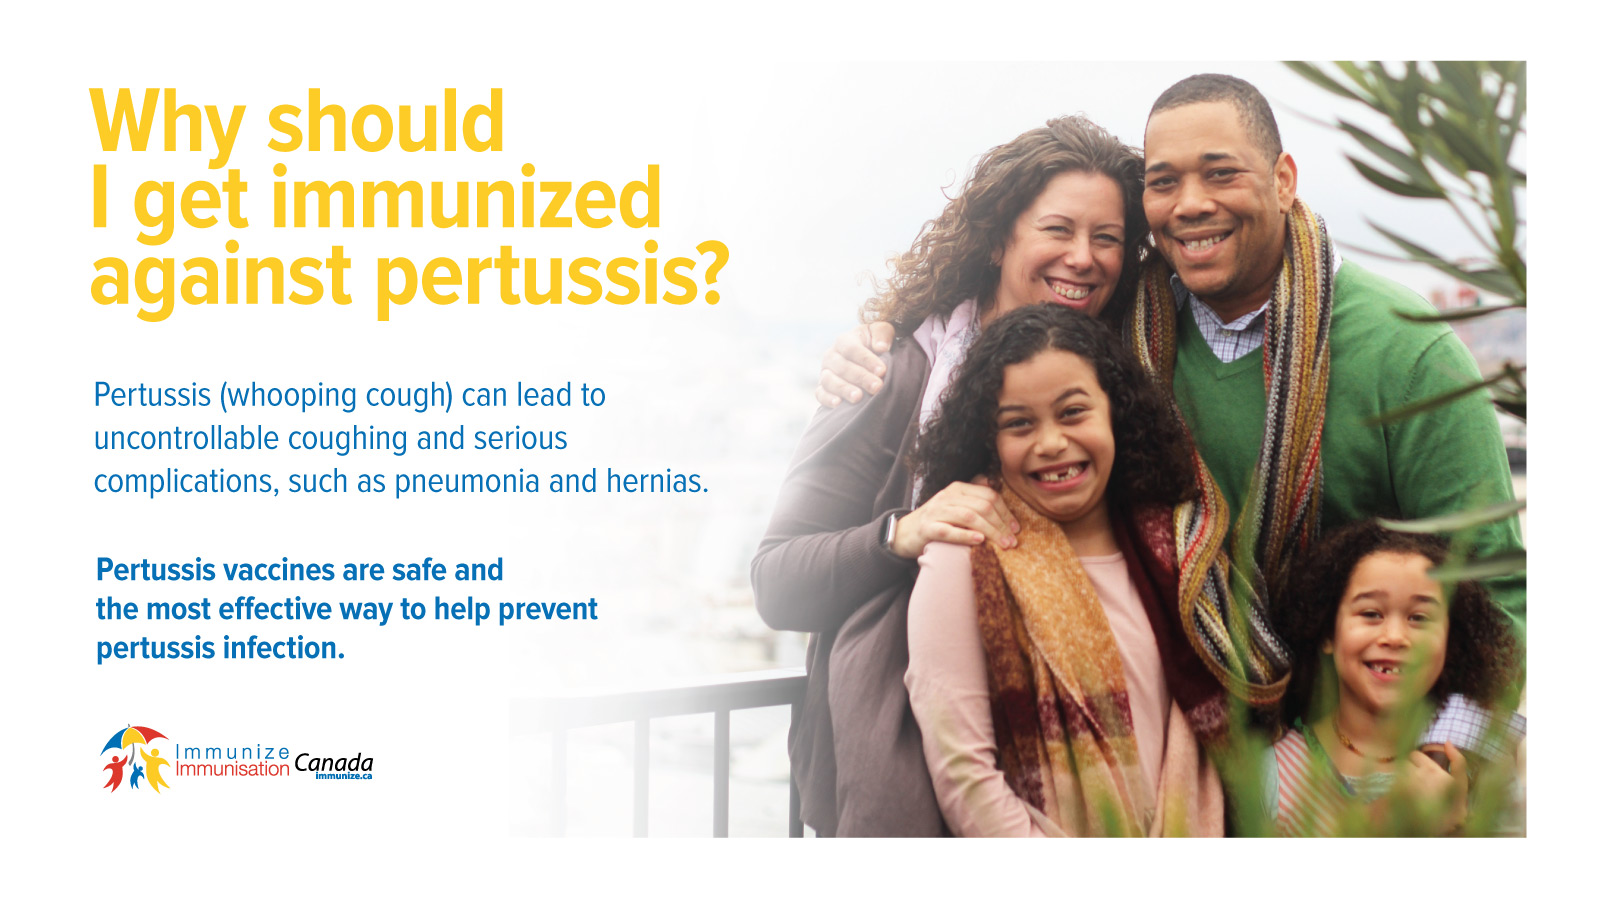 Why should I get immunized against pertussis? (image for Twitter and Facebook 4)